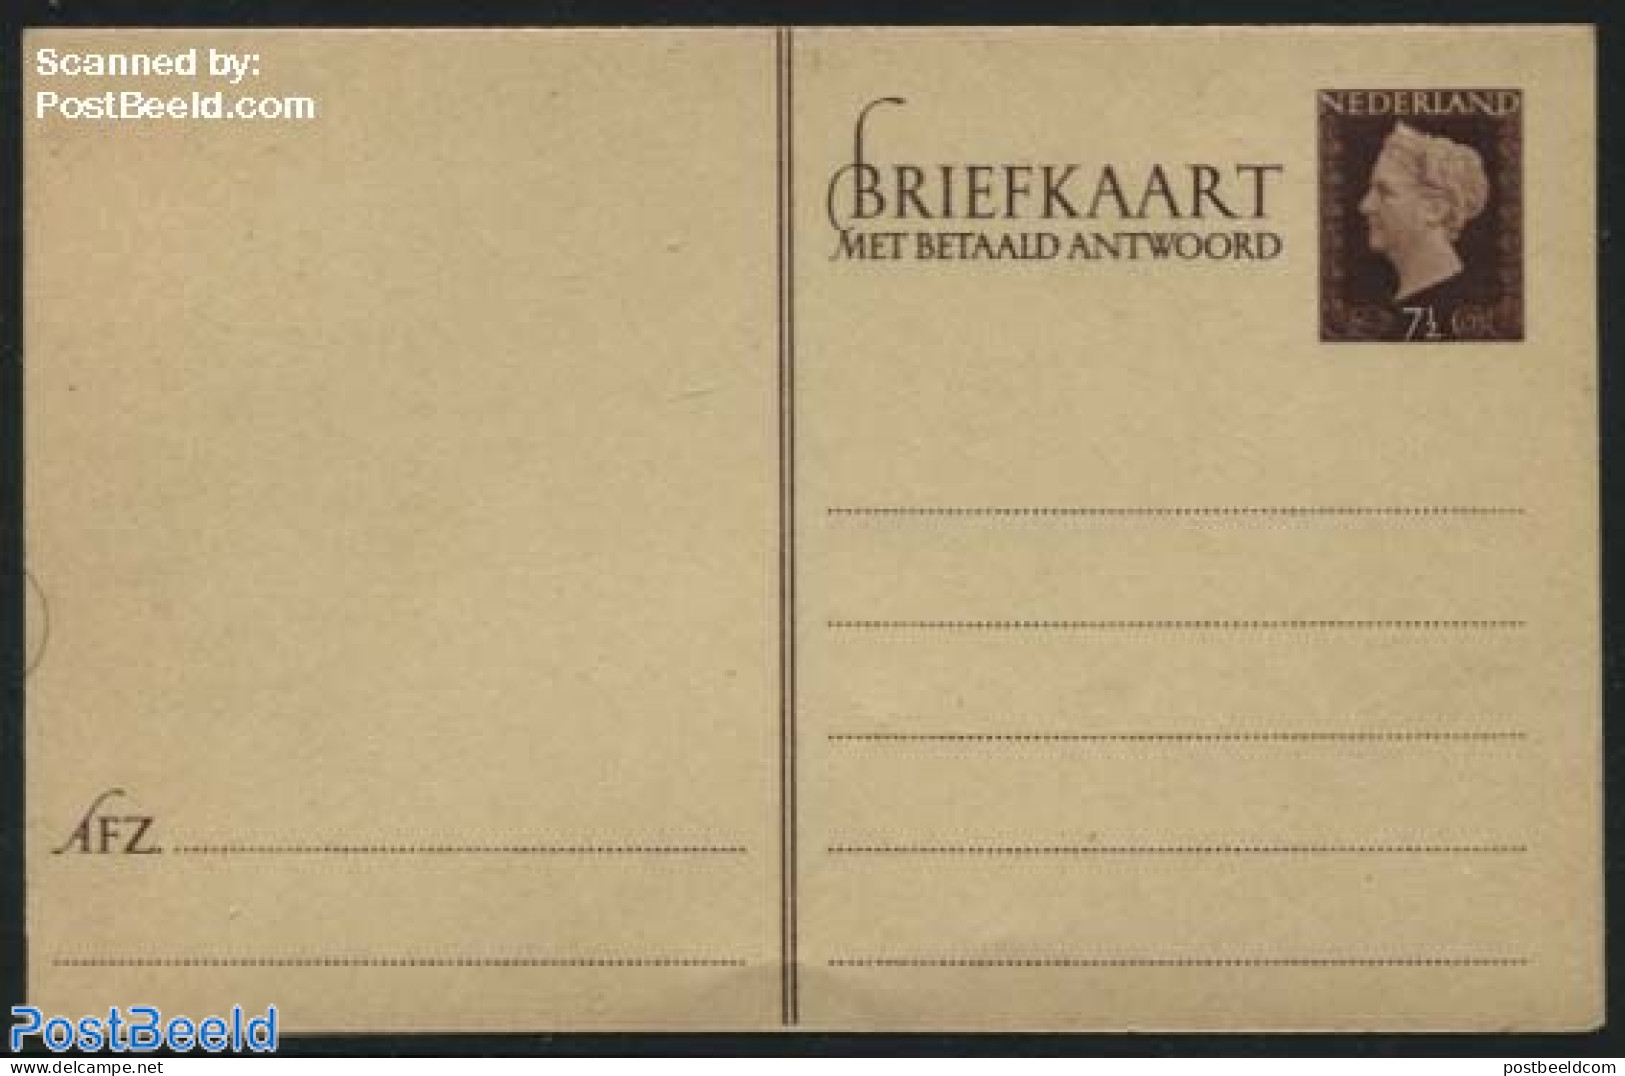 Netherlands 1947 Reply Paid Postcard 7.5+7.5c, Unused Postal Stationary - Covers & Documents